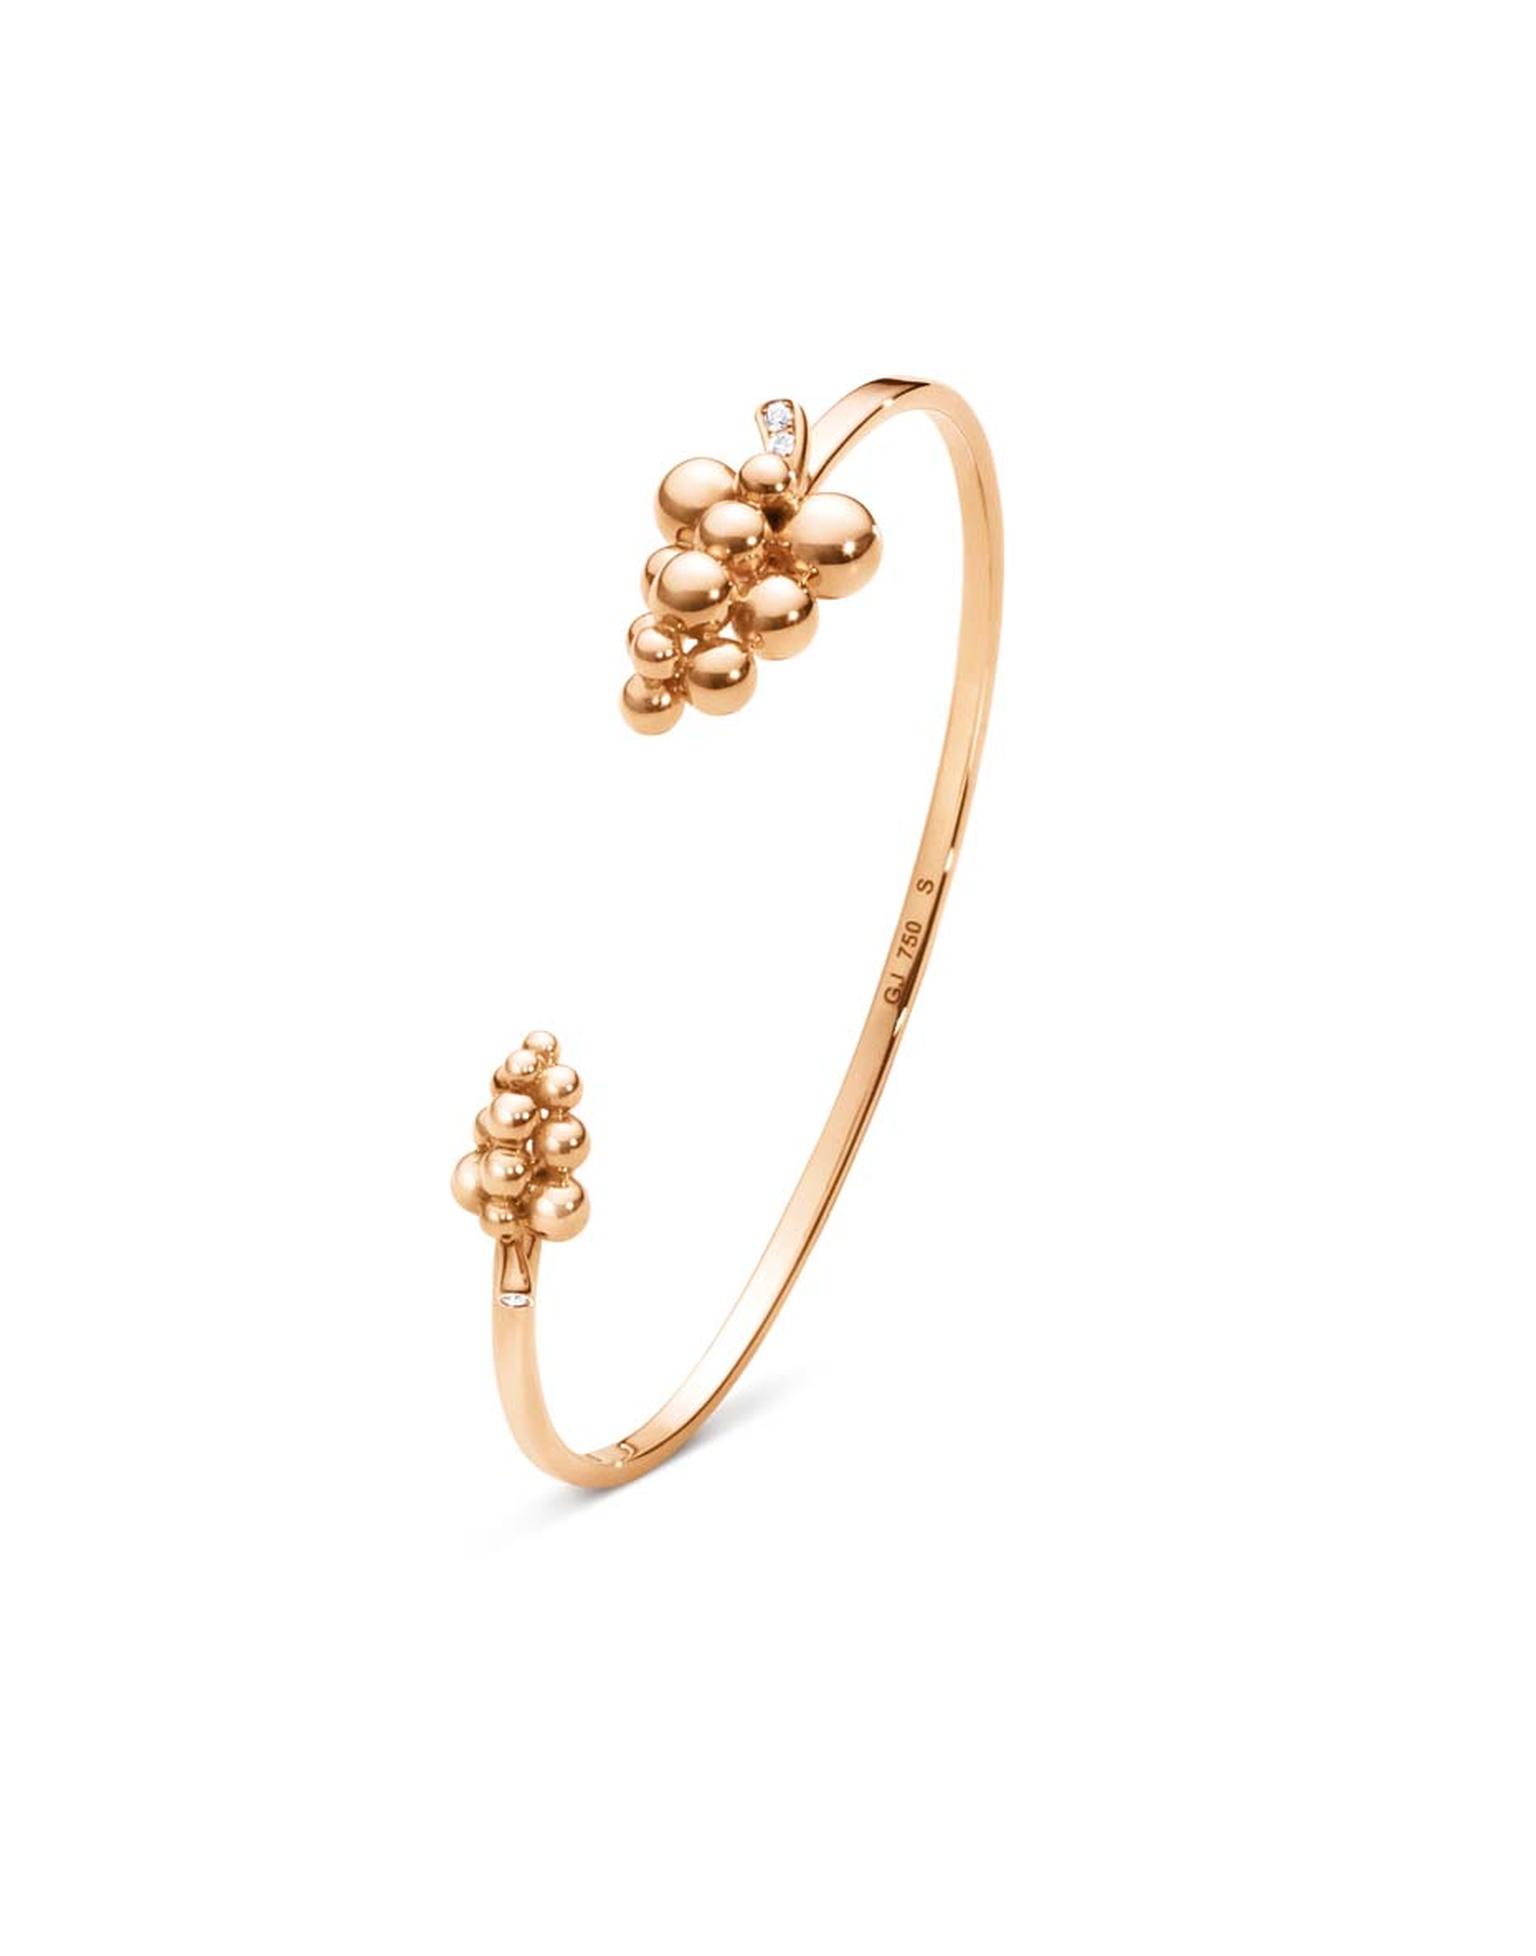 Georg Jensen rose gold bangle from the Moonlight Grapes collection with brilliant-cut diamonds (£1,575).